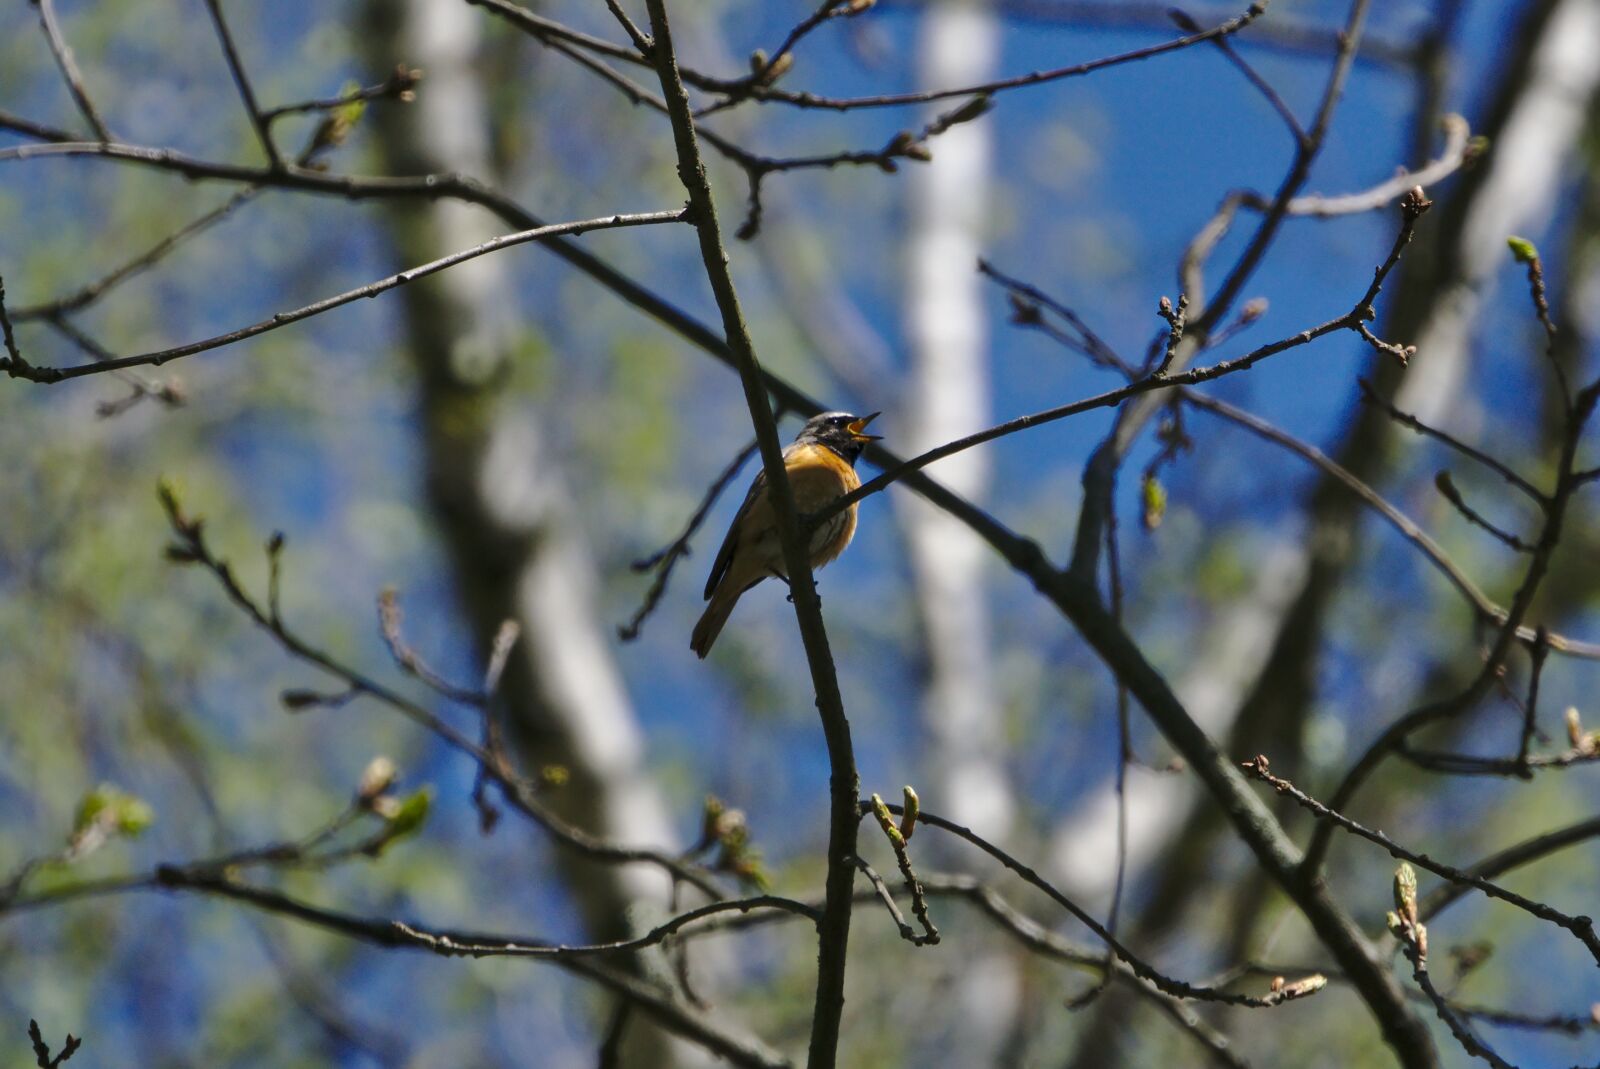 Sony a6000 sample photo. Common redstart, songbird, nature photography